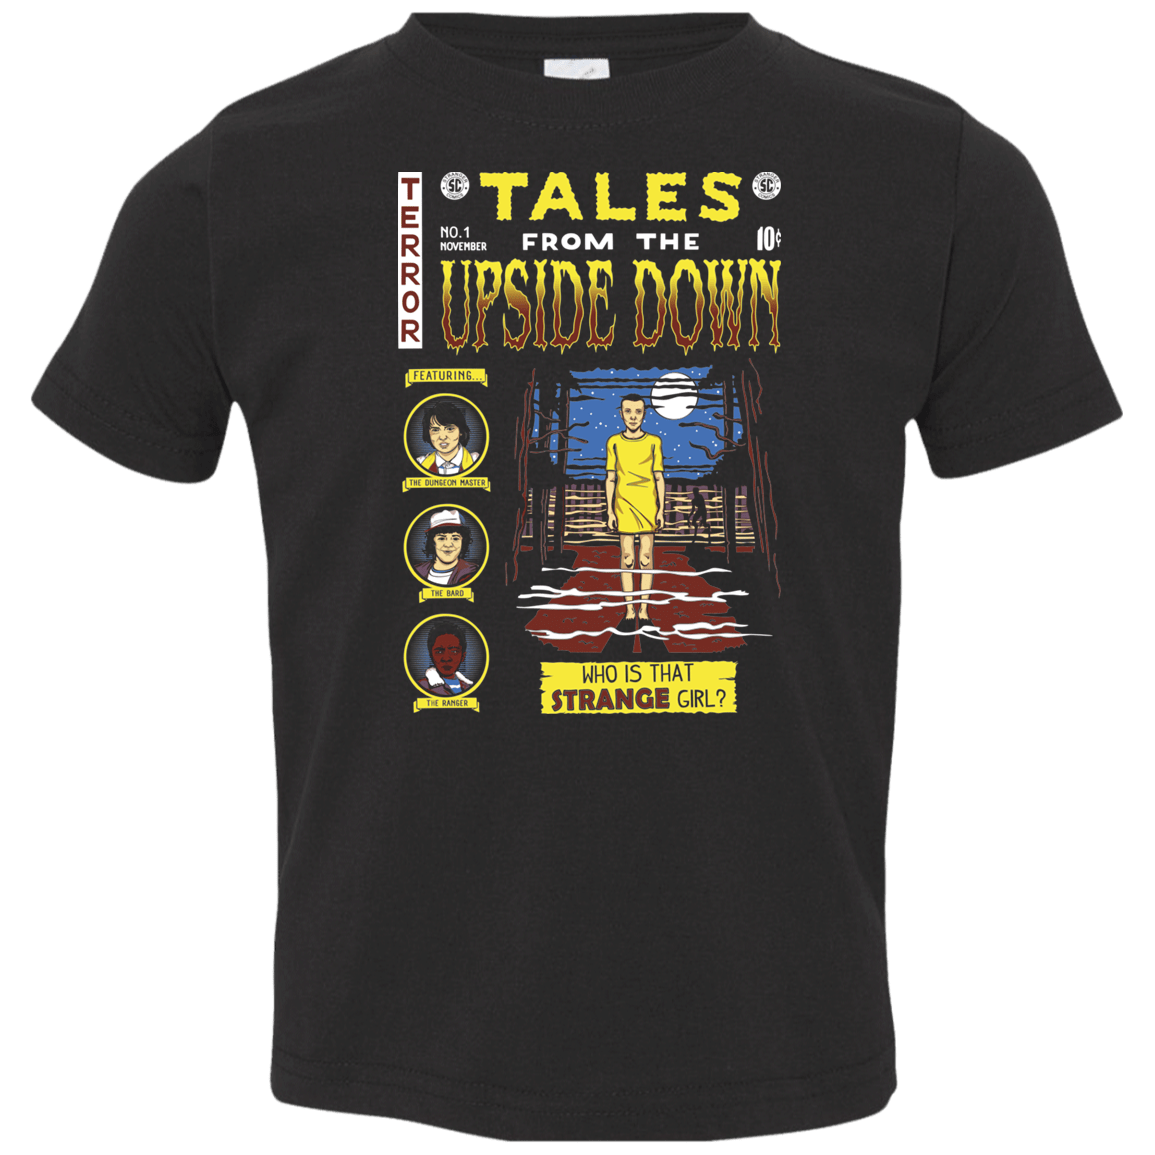 T-Shirts Black / 2T Tales from the Upside Down Toddler Premium T-Shirt